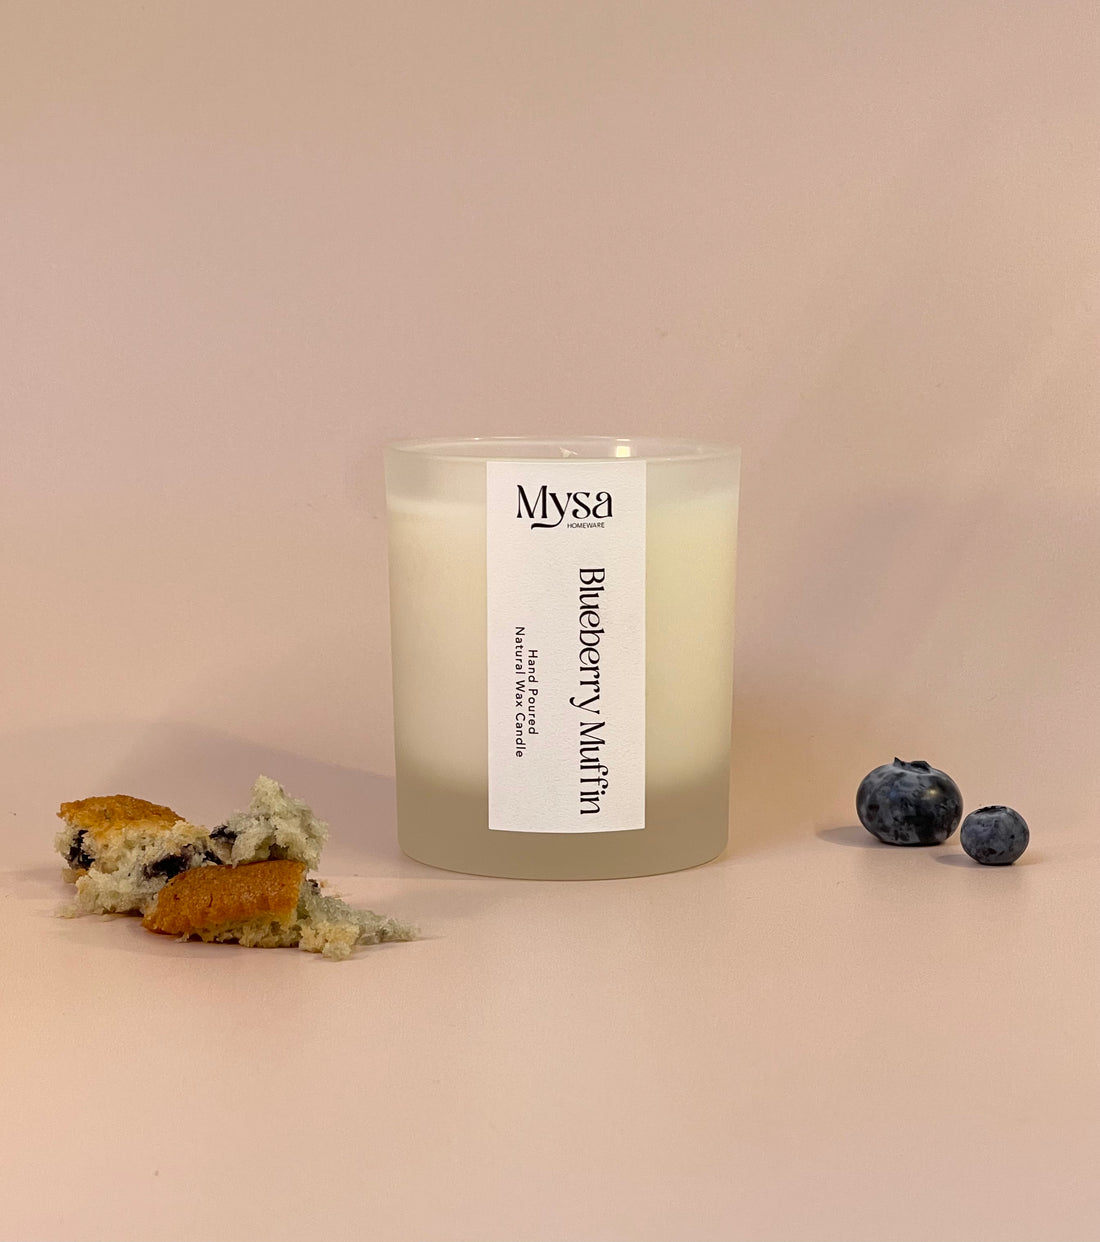 Blueberry Muffin luxury scented candle in gift box, with natural wax and blueberry and vanilla fragrance.